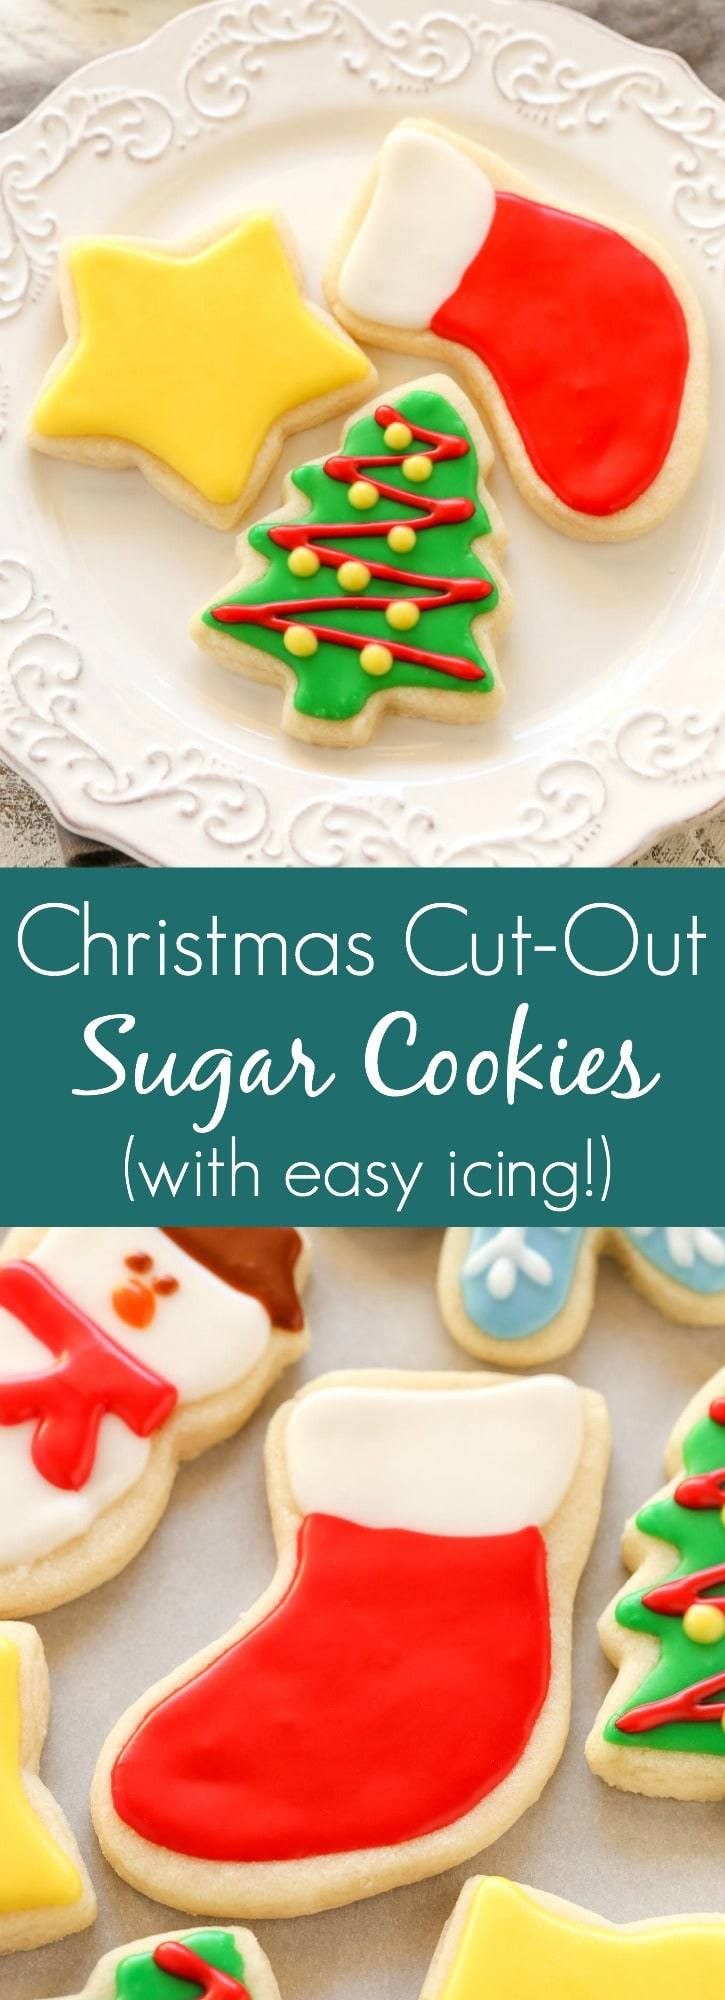 Soft Christmas Cut Out Cookies
 Soft Christmas Cut Out Sugar Cookies Live Well Bake ten